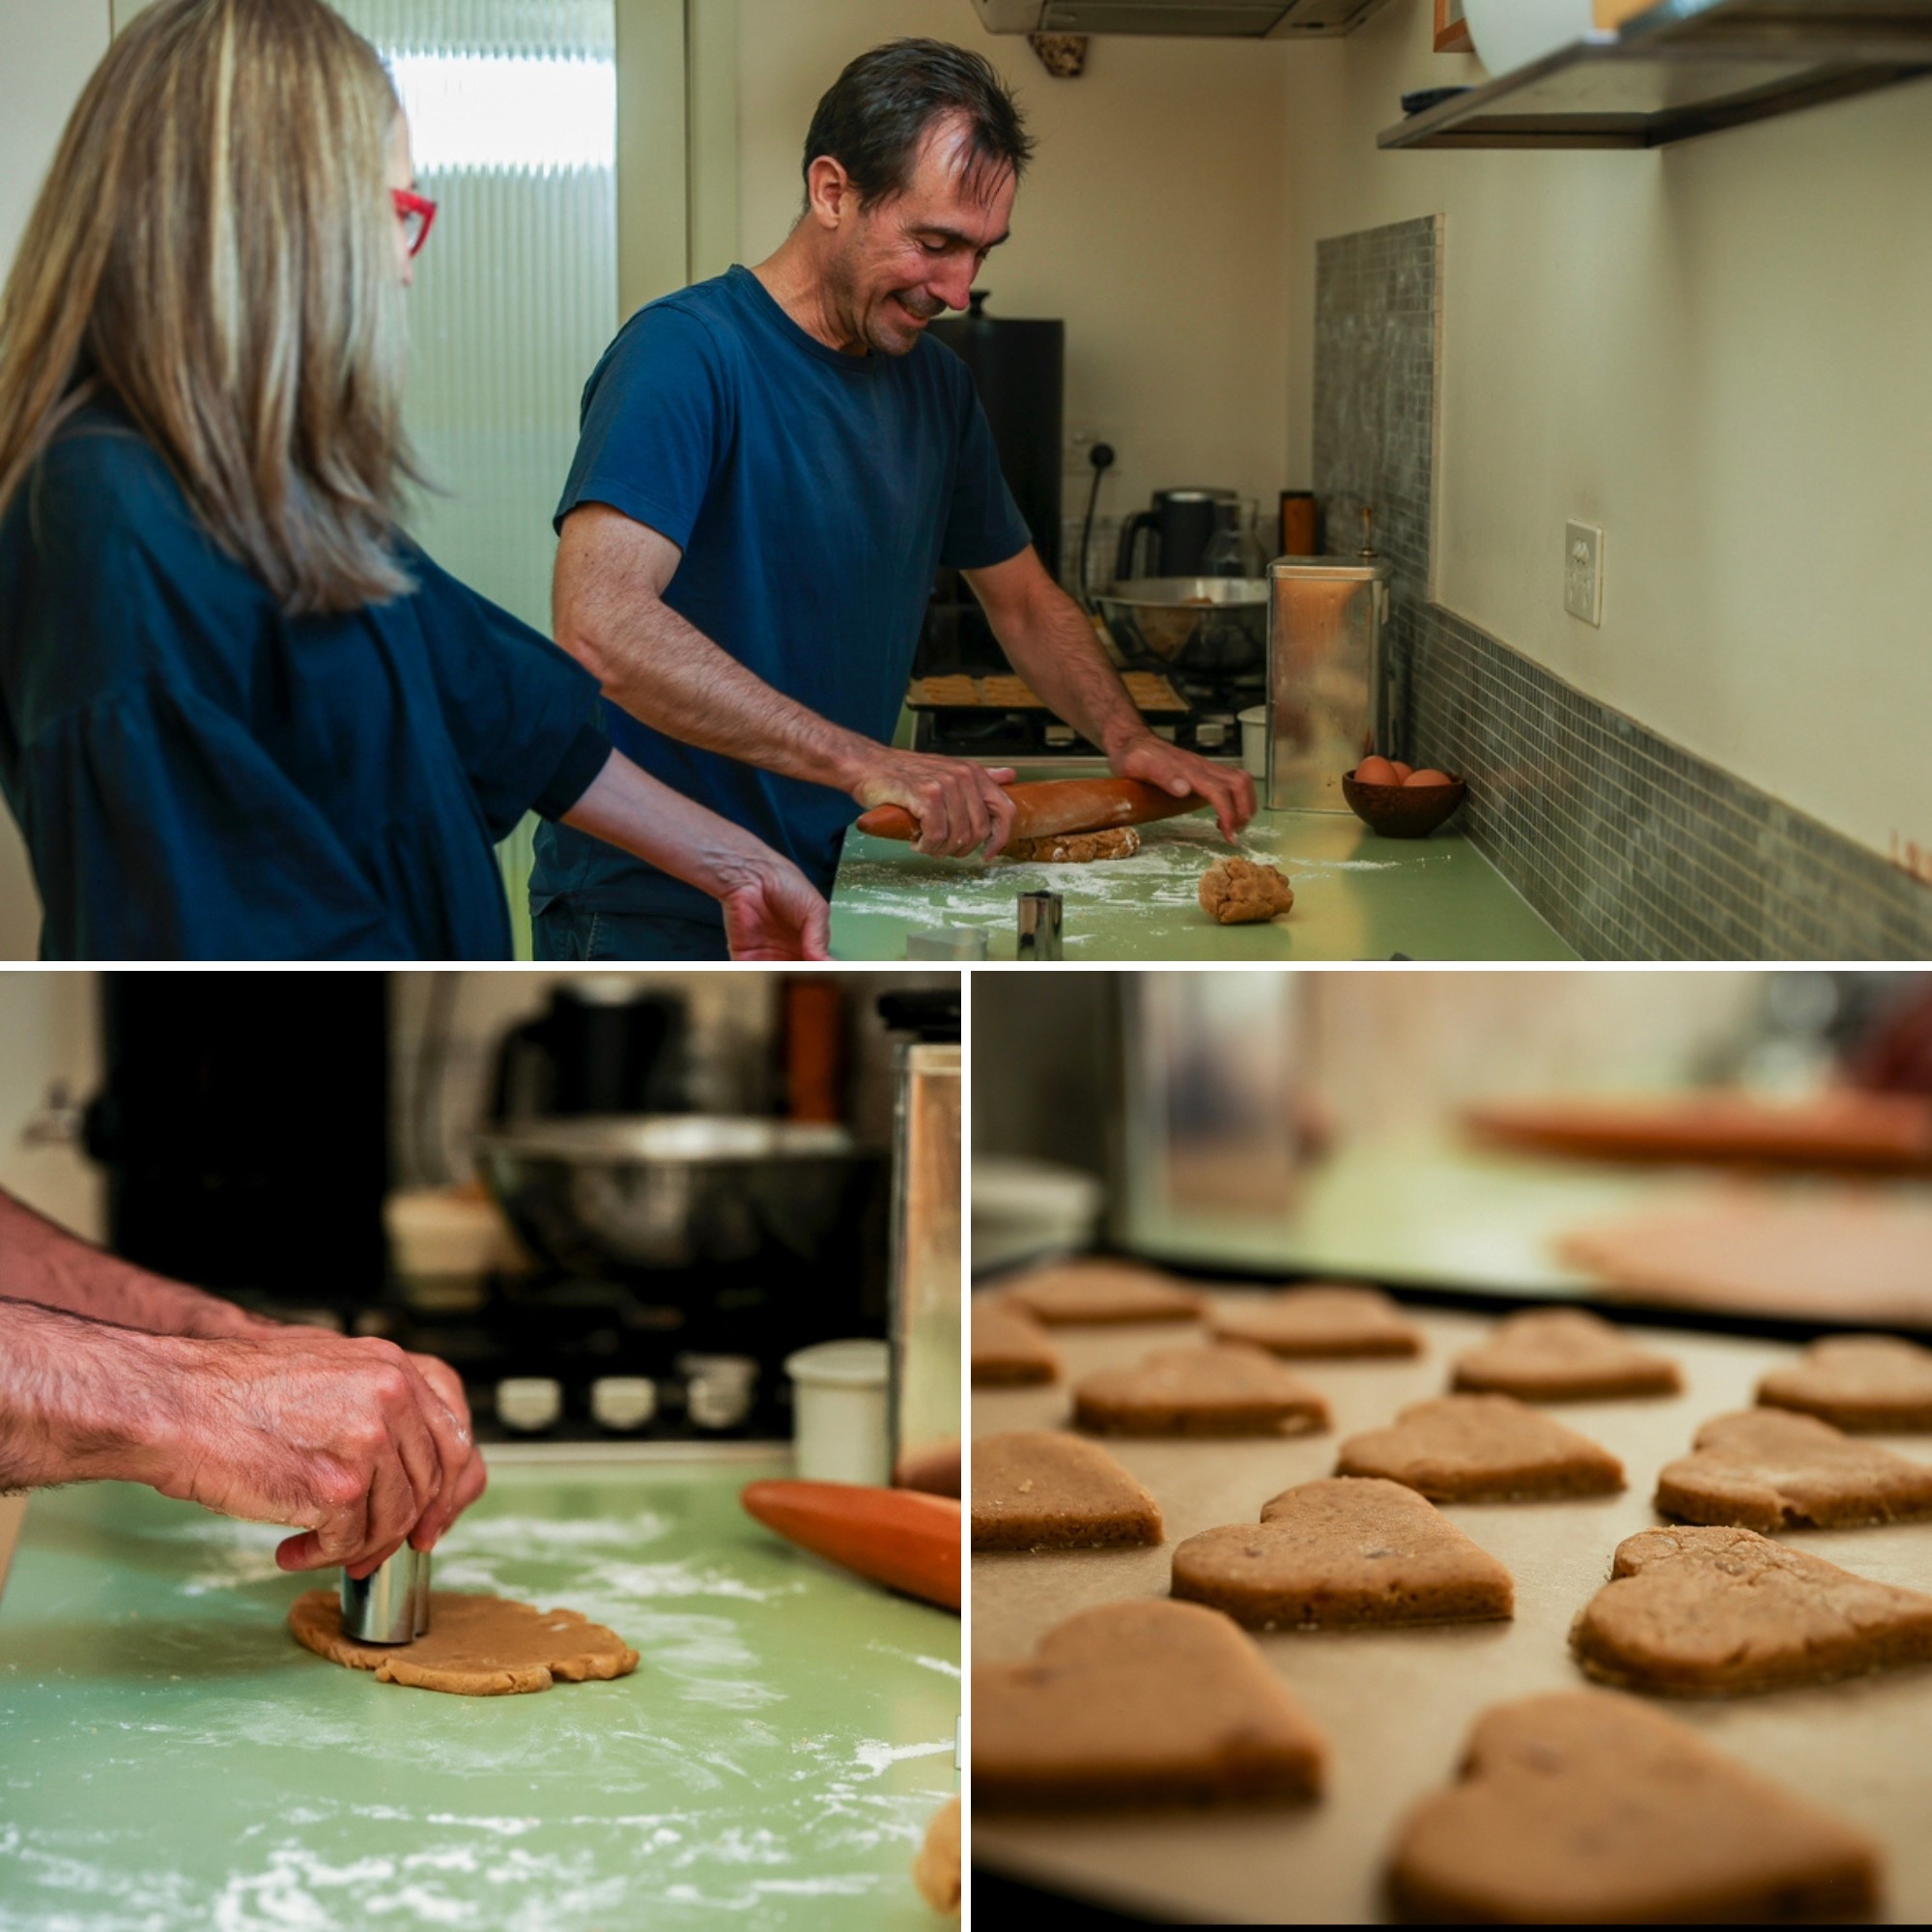 Multiple images showing a man and a woman rolling biscuit dough, hands cutting the dough and a tray of heart-shaped biscuits.